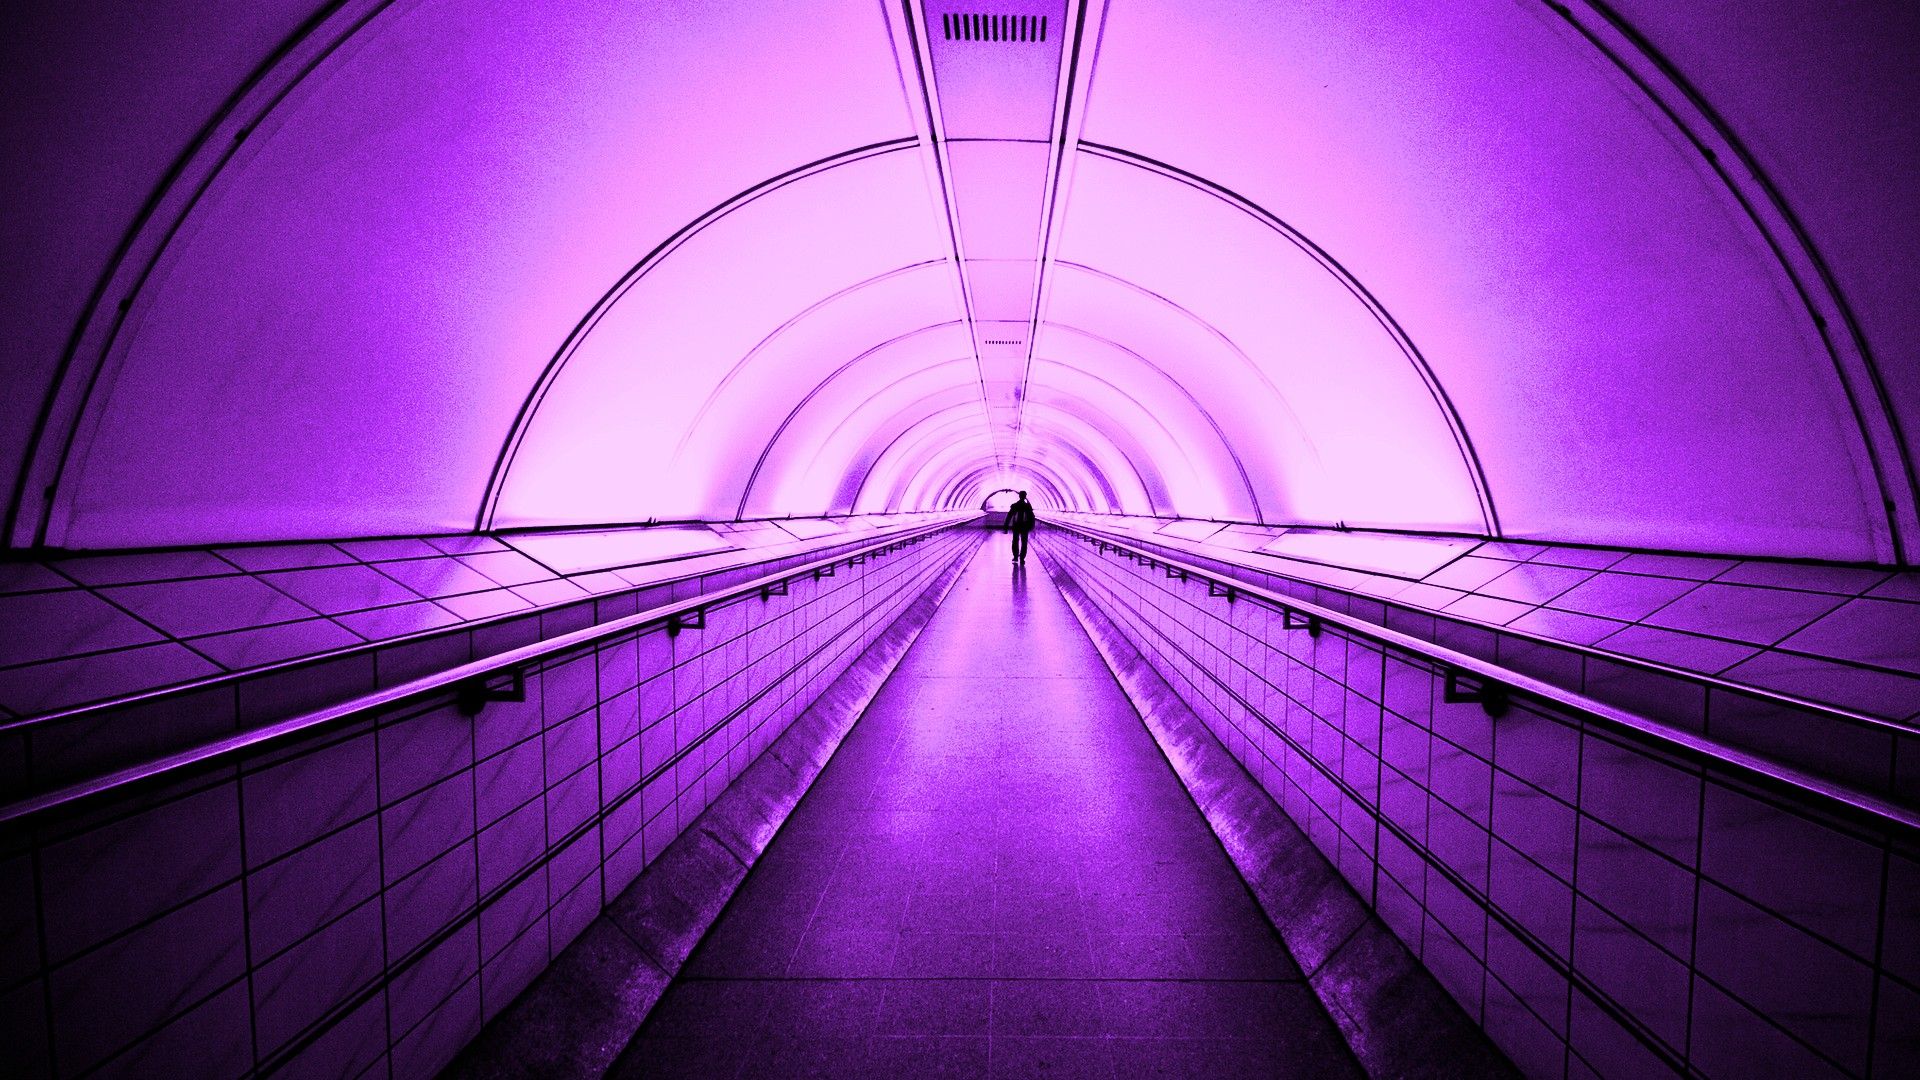 20 Outstanding purple computer wallpaper aesthetic You Can Use It For ...